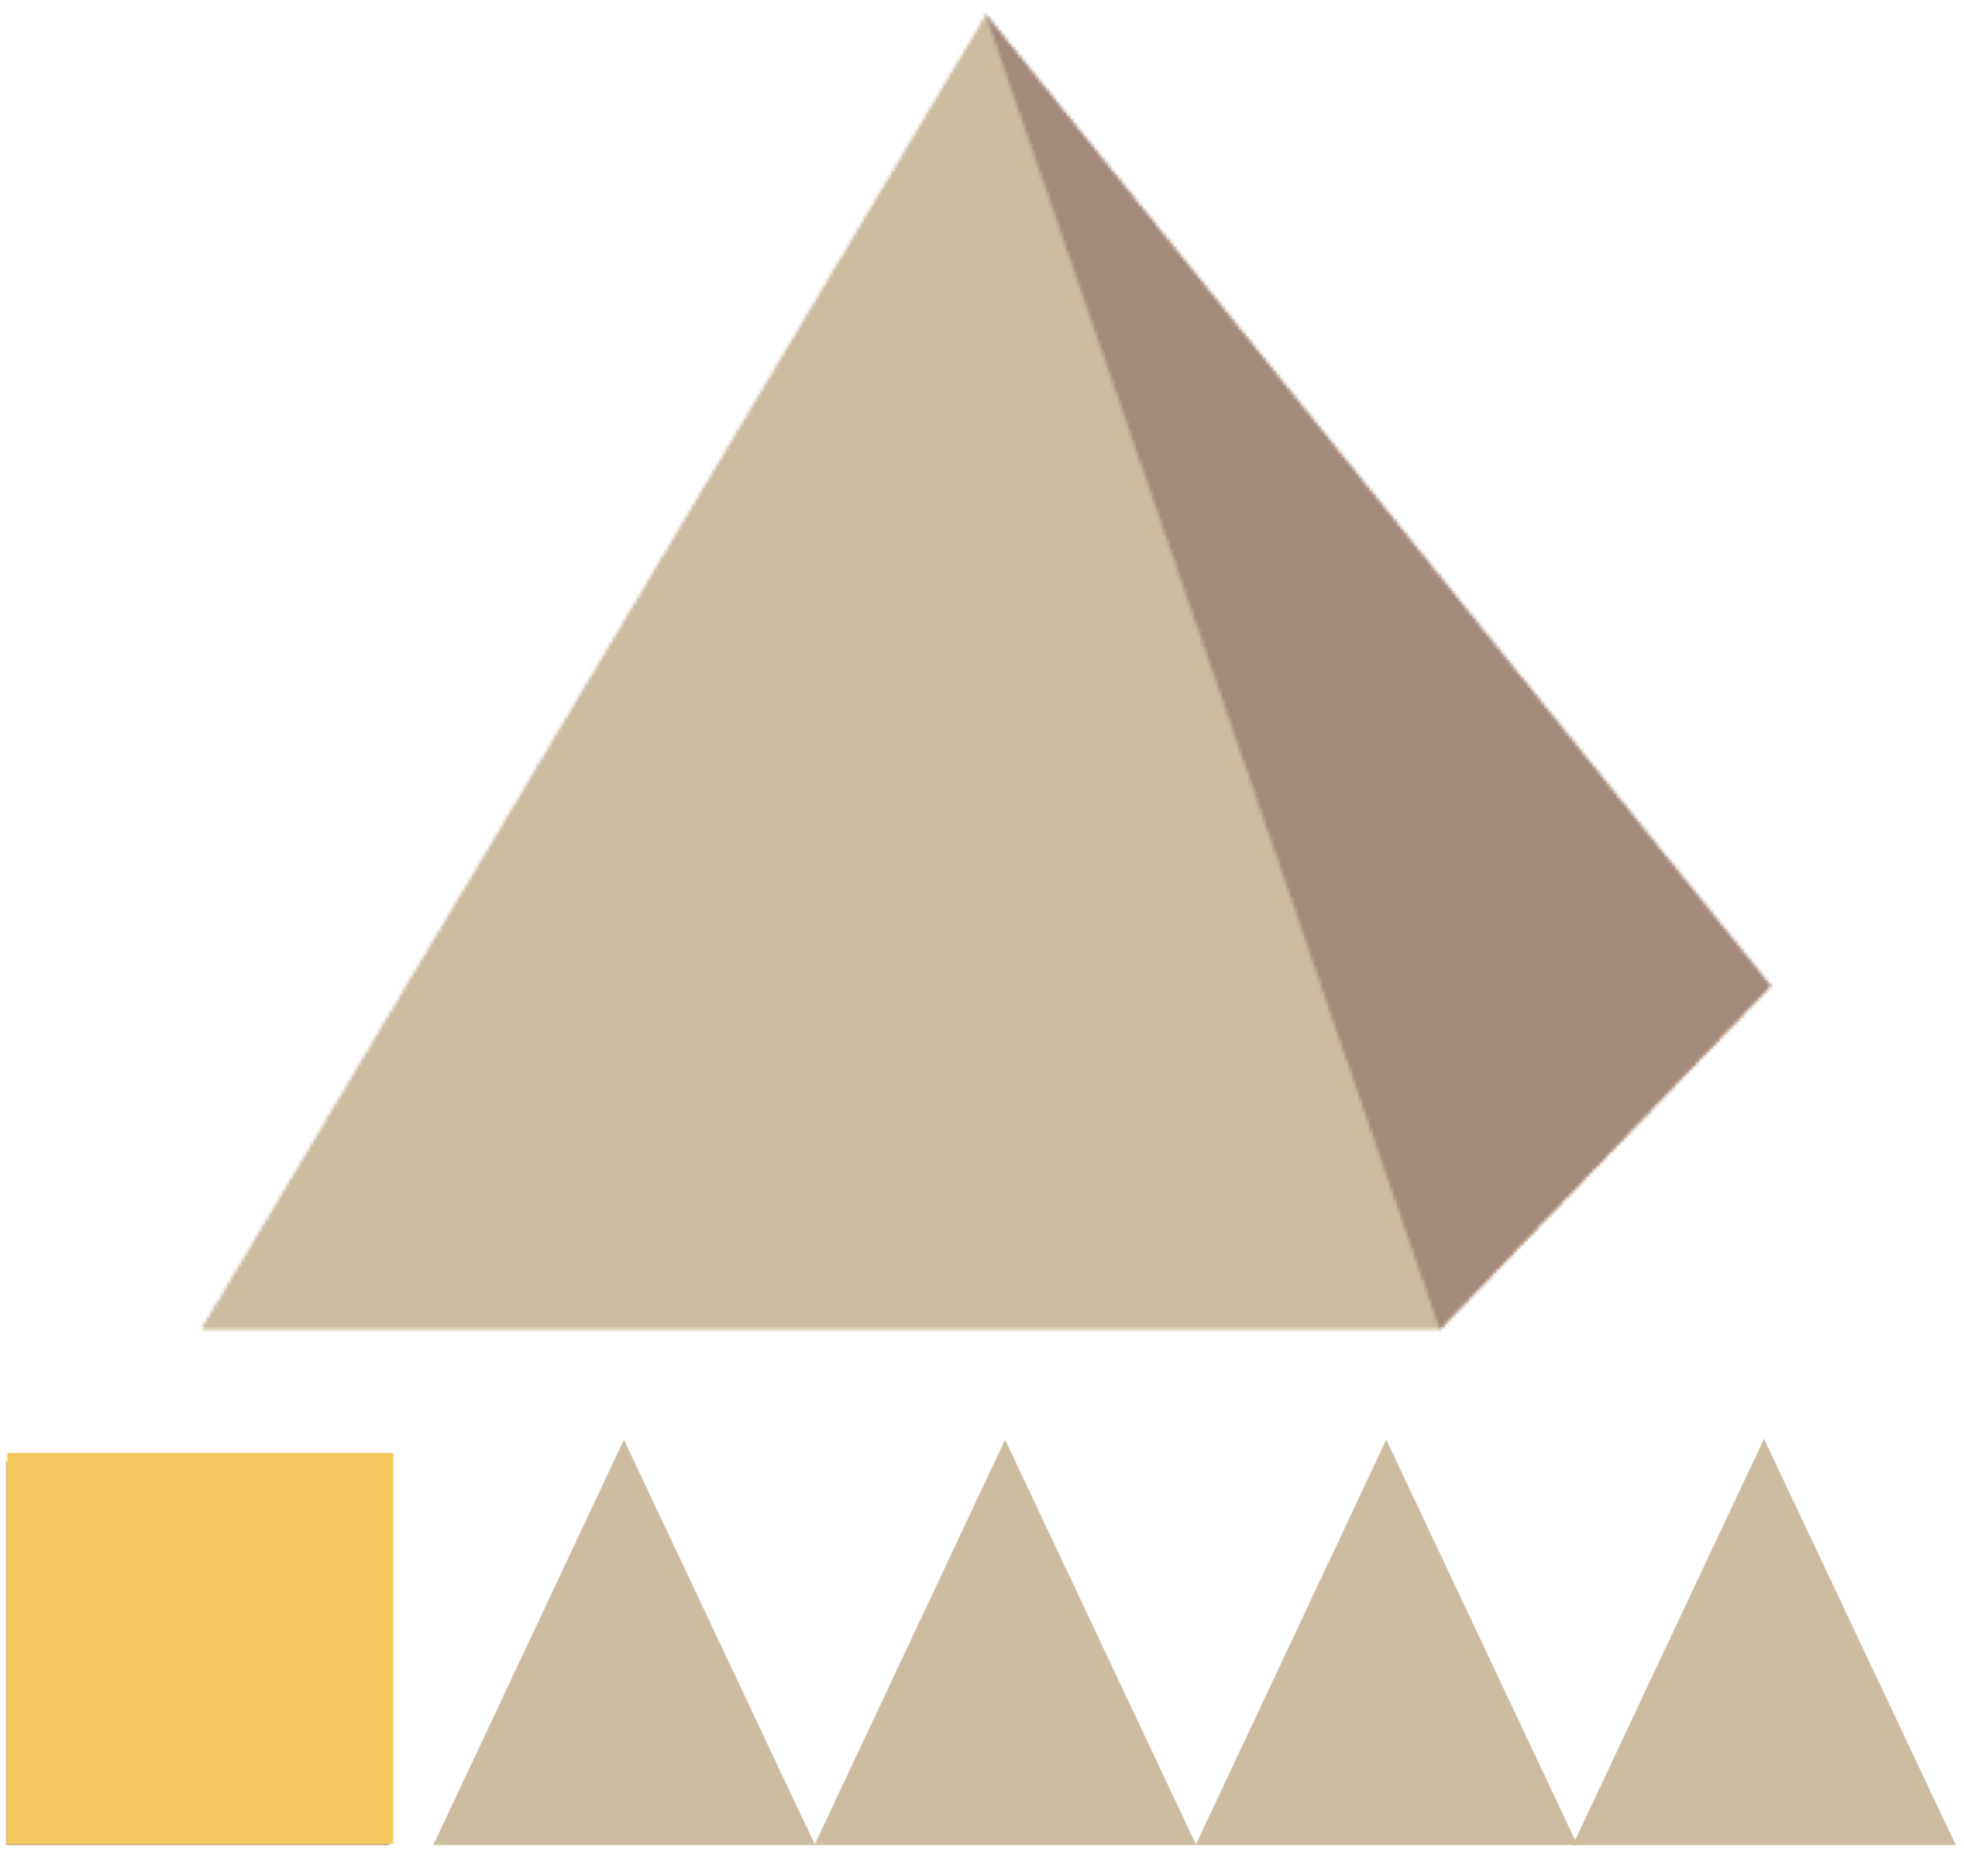 Pyramid, square and four triangles